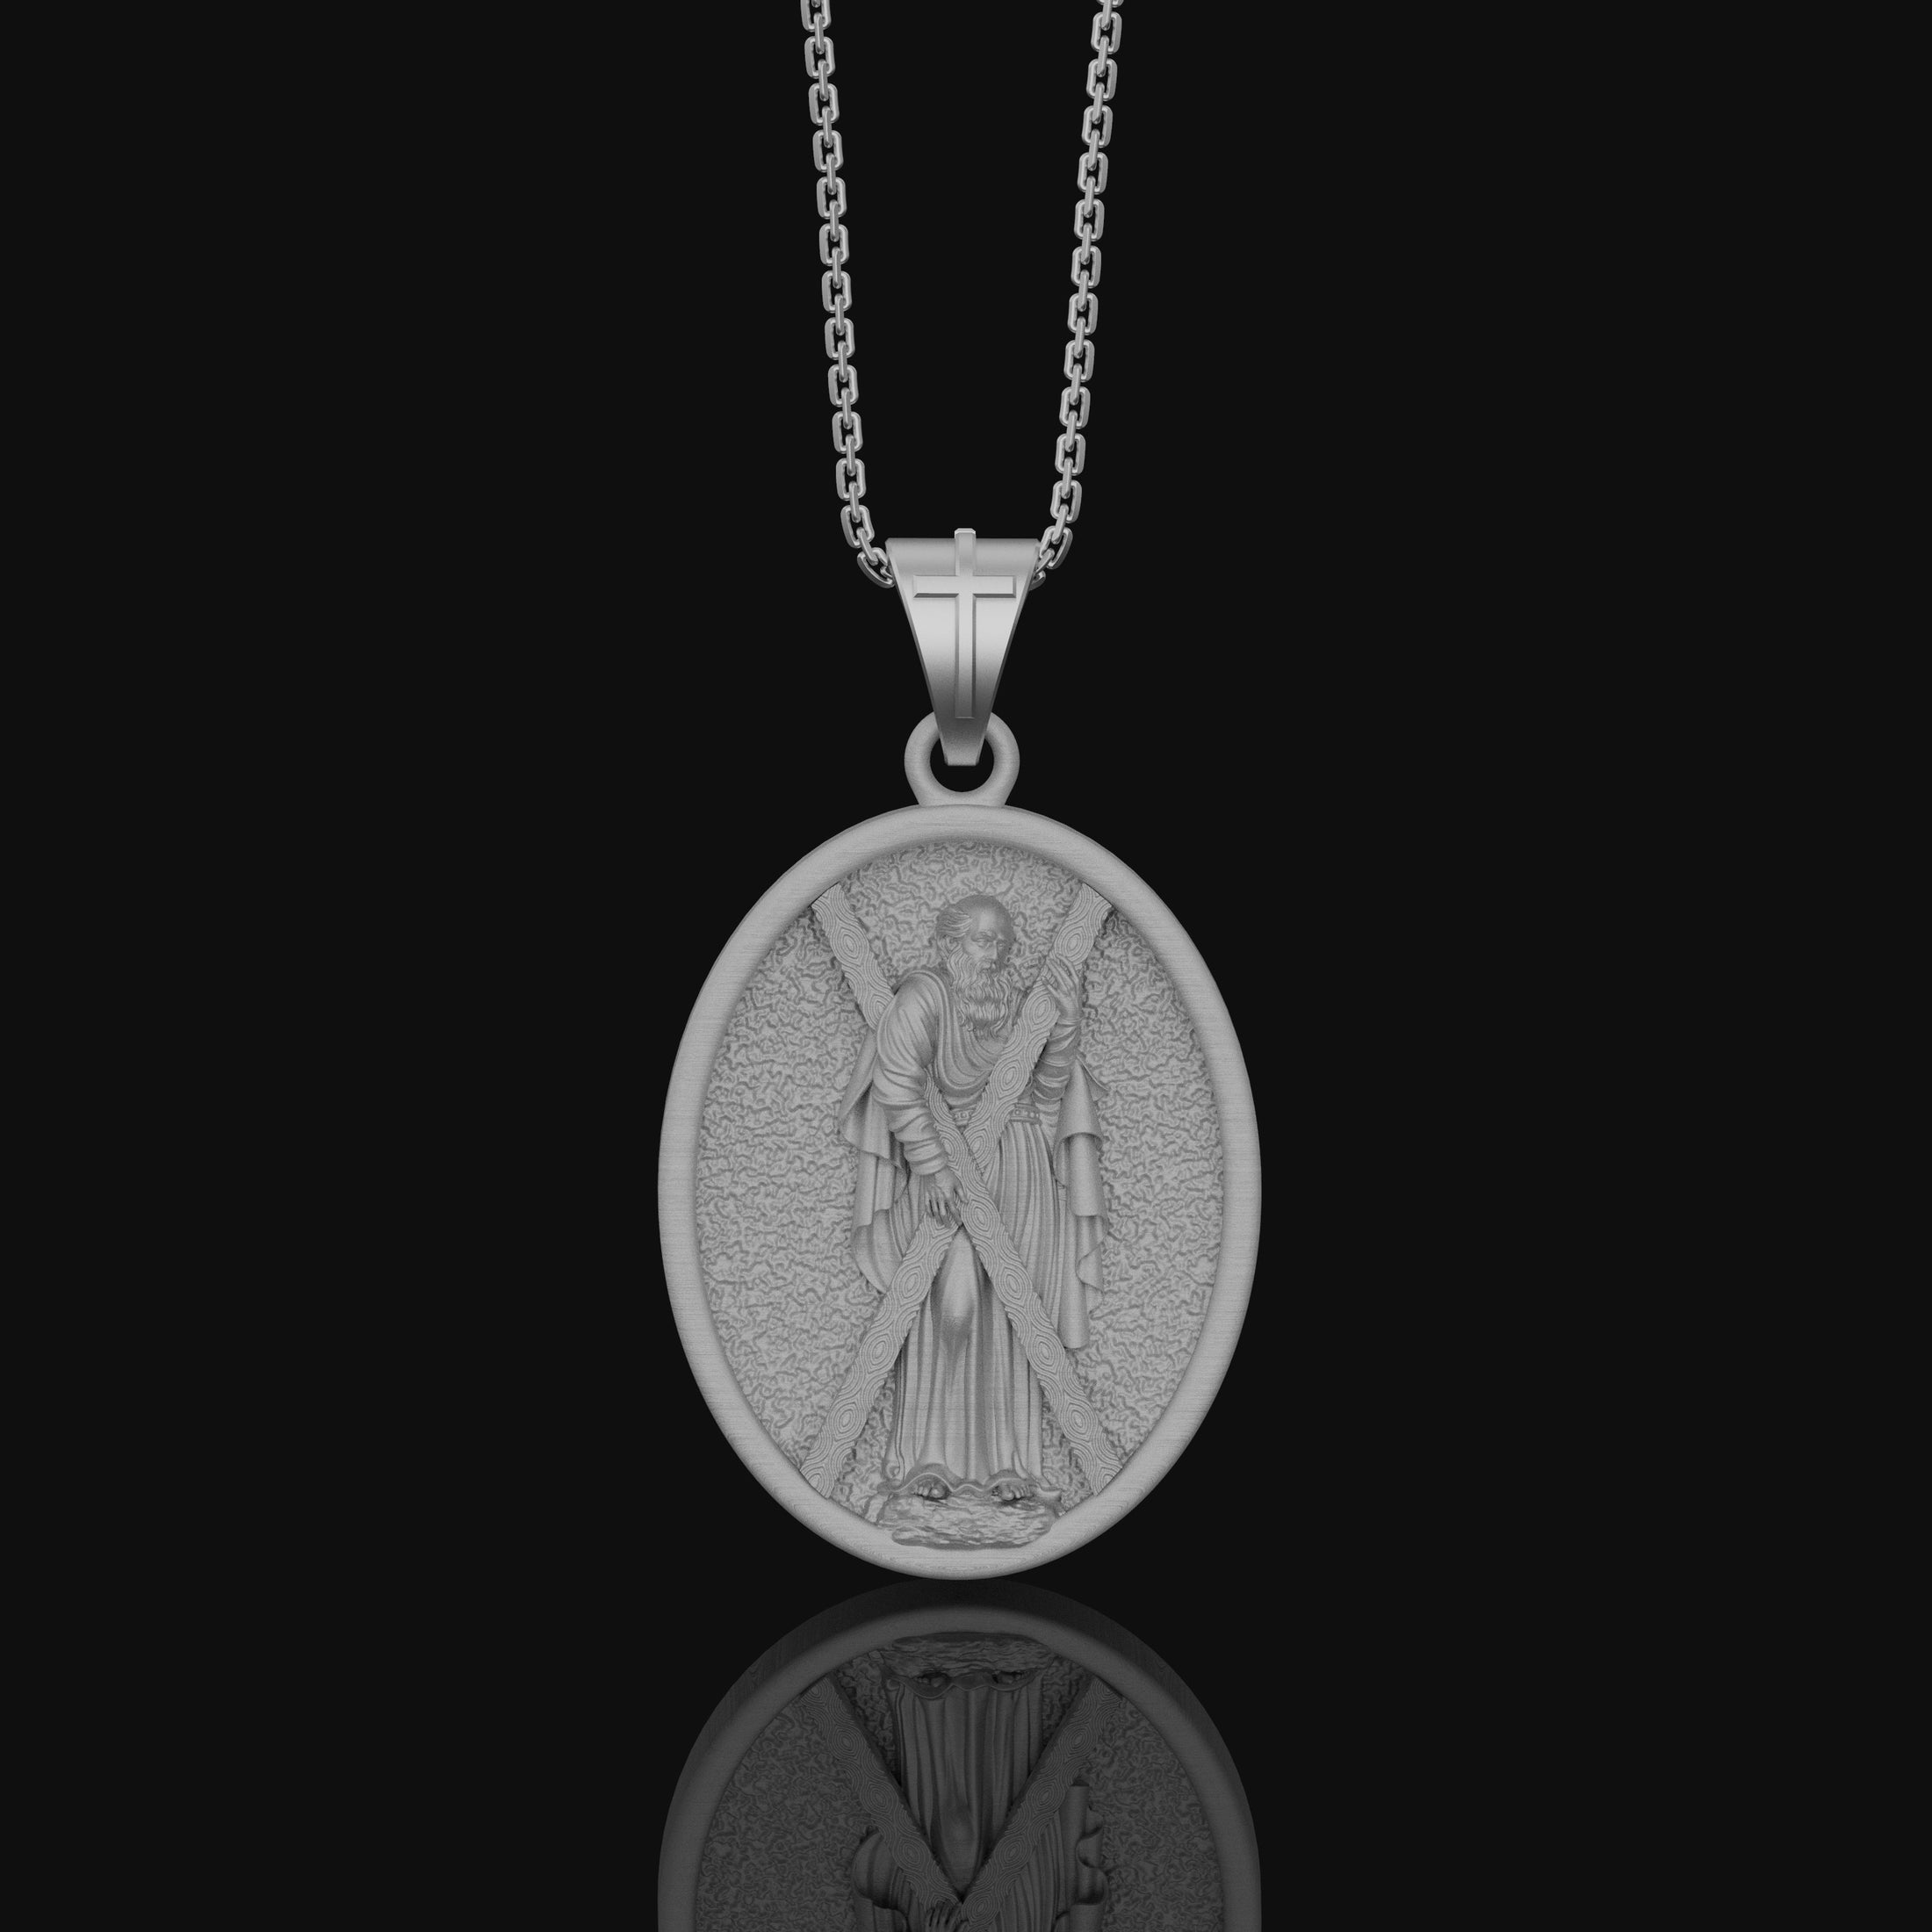 St Andrew Medal, Patron Saint Medal, Andrew The Apostle, Religious Medals Jewelry, Catholic Necklace, Confirmation Gift Polished Matte